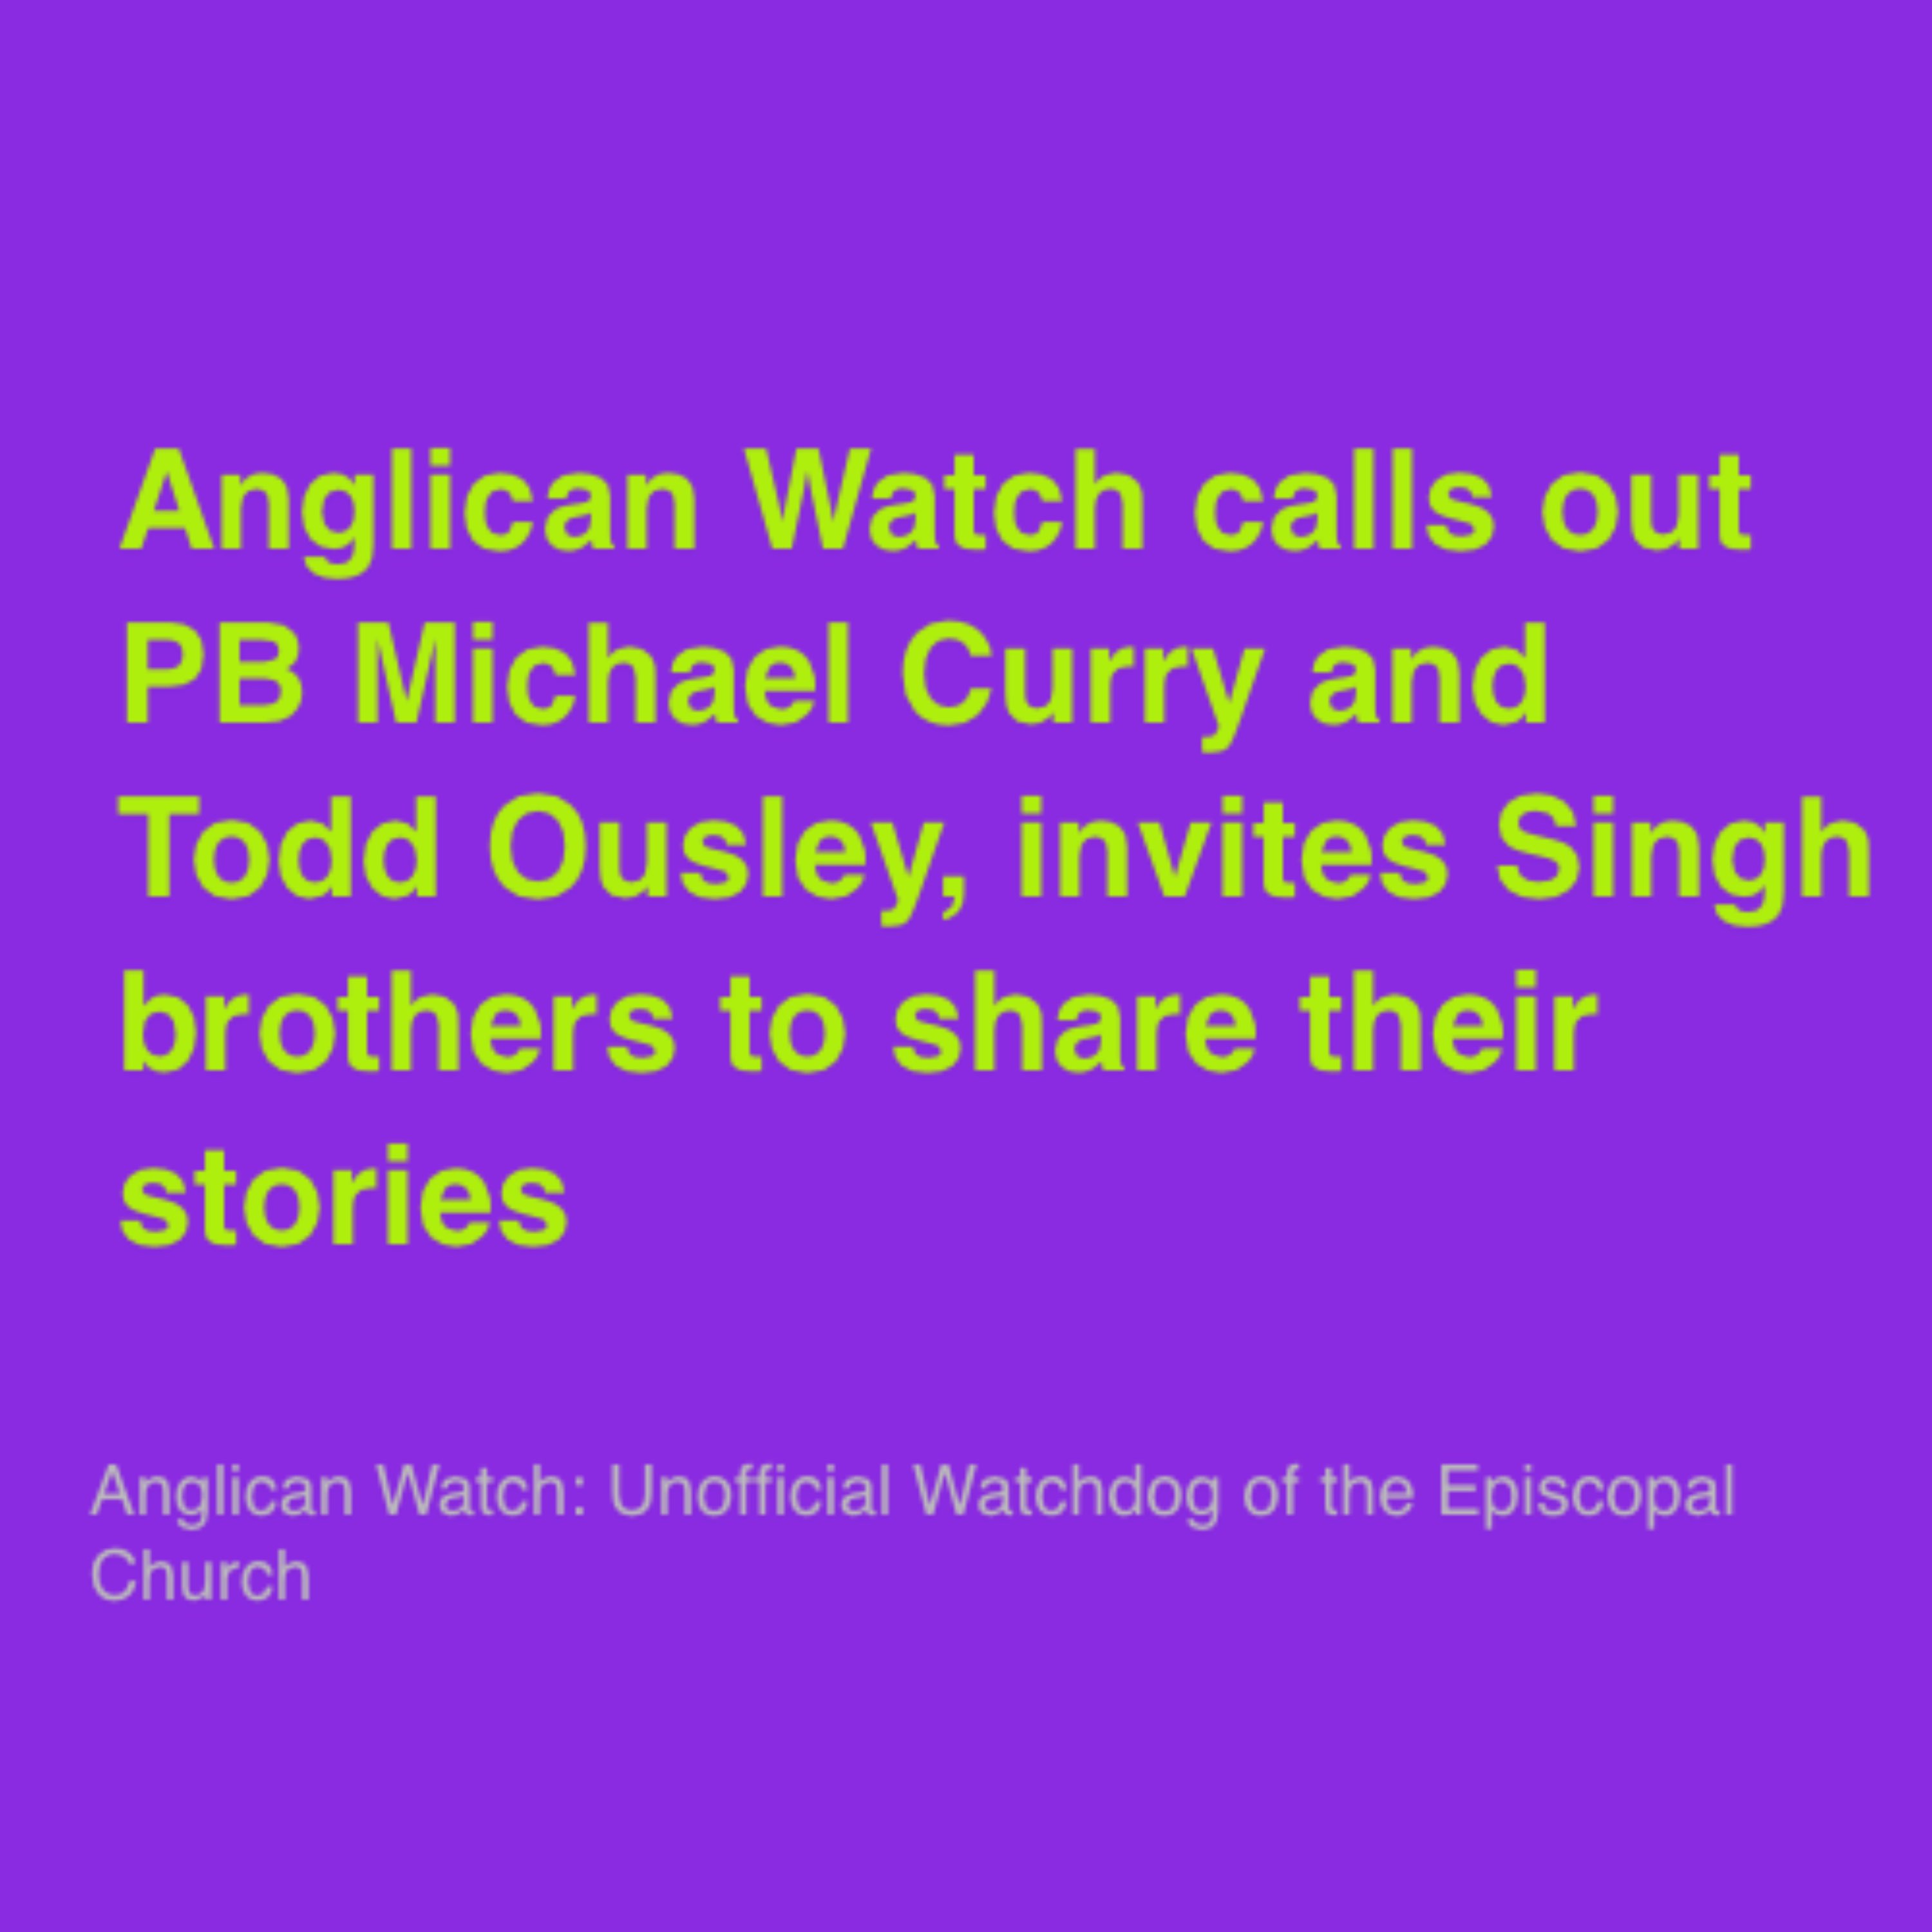 Anglican Watch calls out PB Michael Curry and Todd Ousley, invites Singh brothers to share their stories